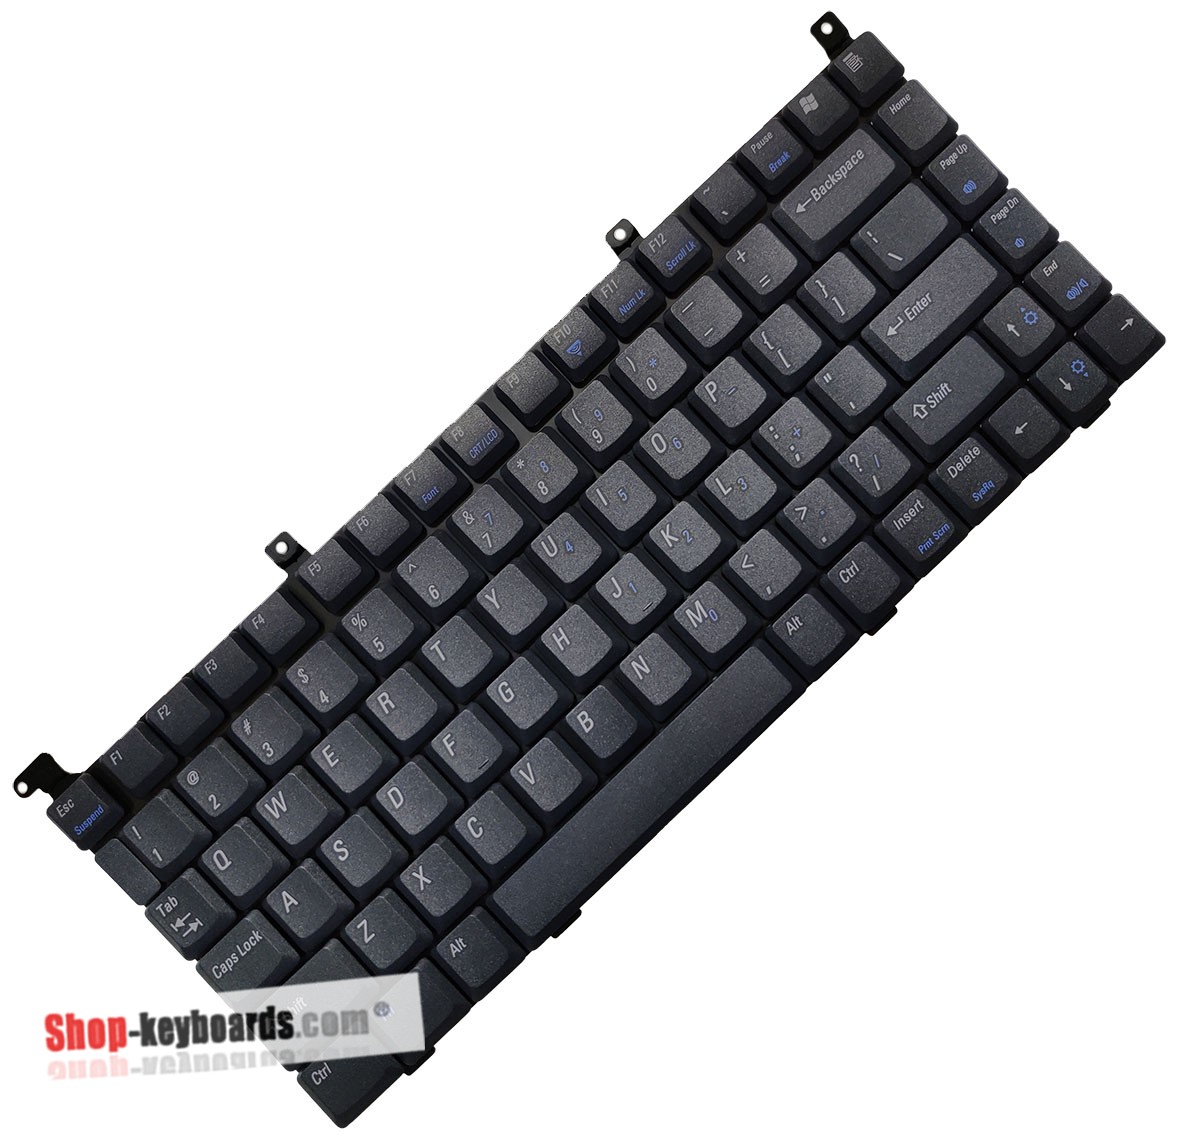 Dell Inspiron 5100 Keyboard replacement